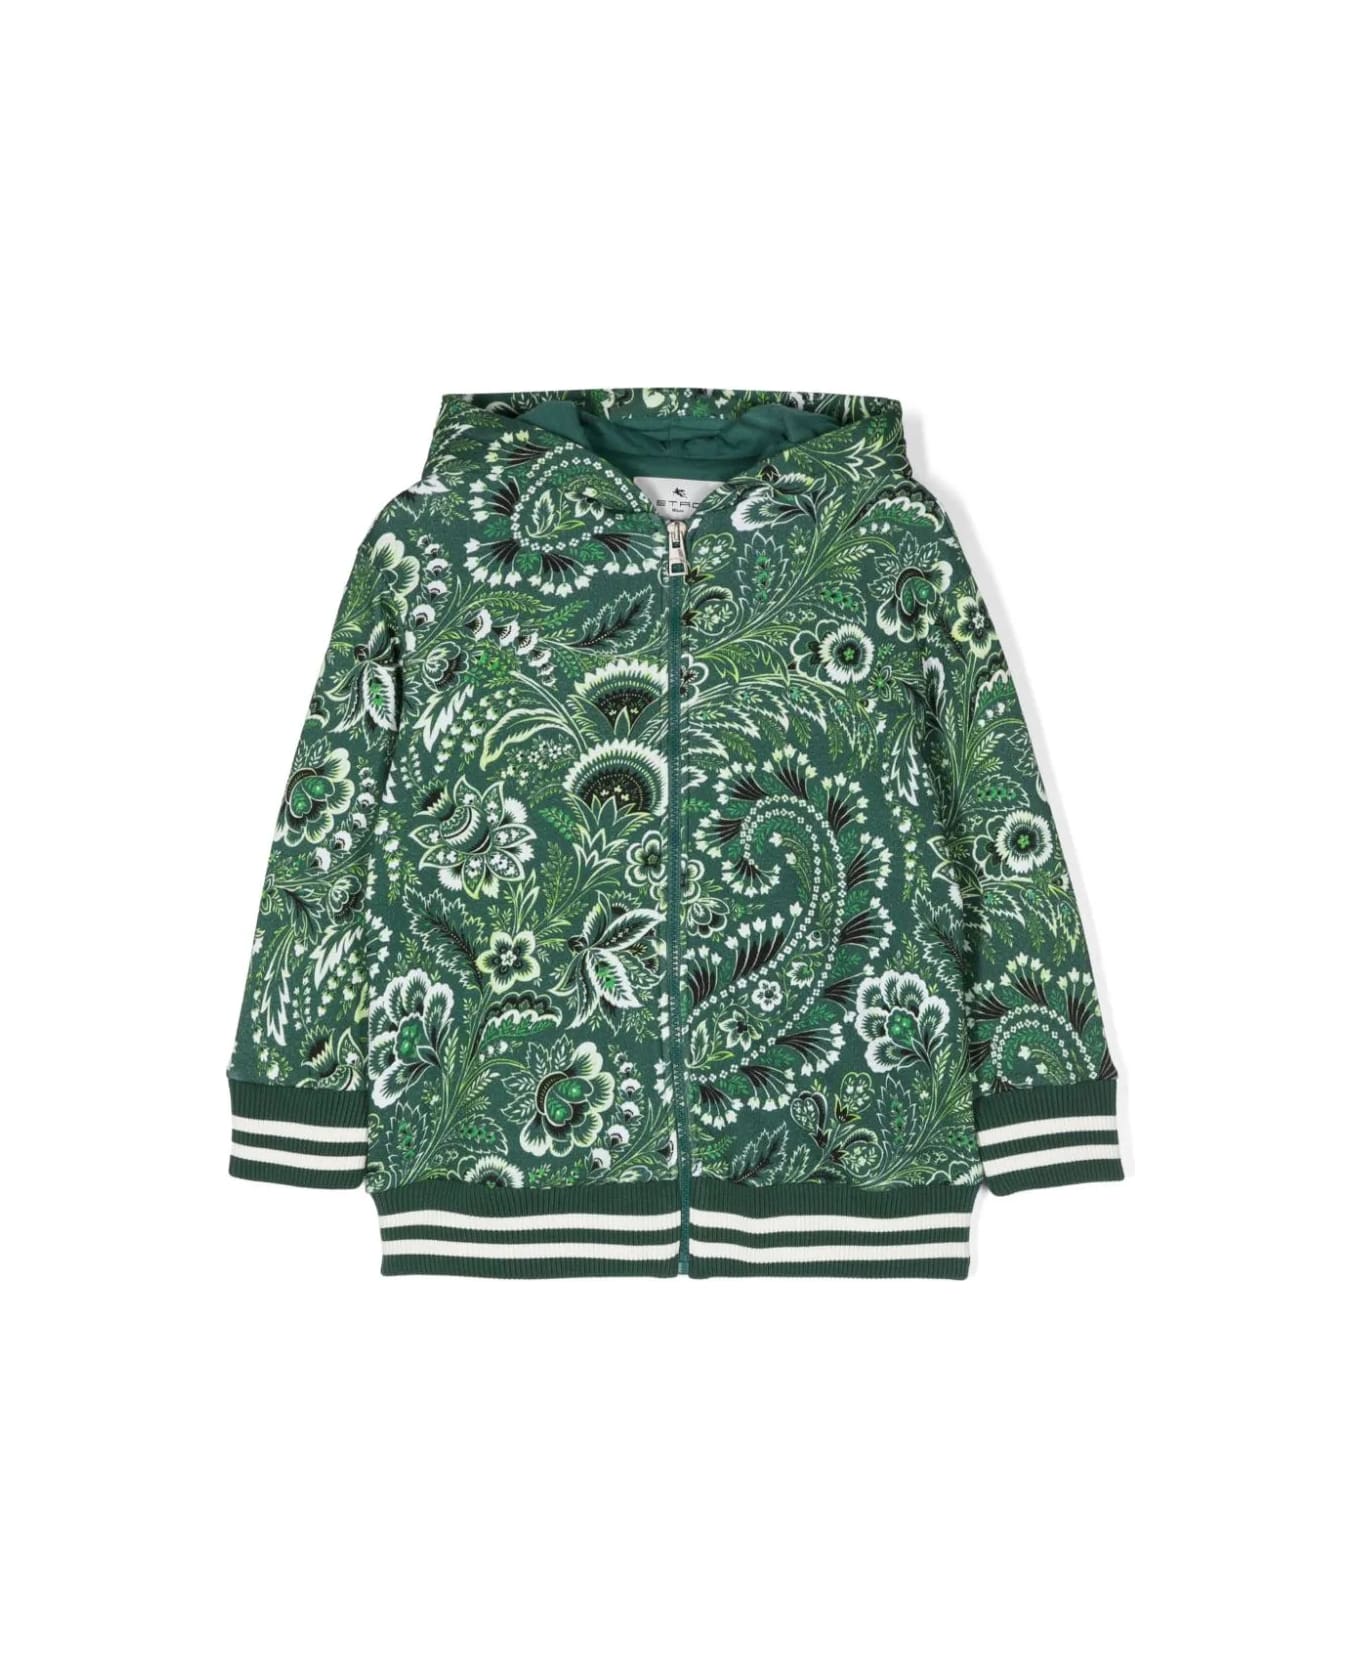 Etro Green Zip-up Hoodie With Paisley Print - Green